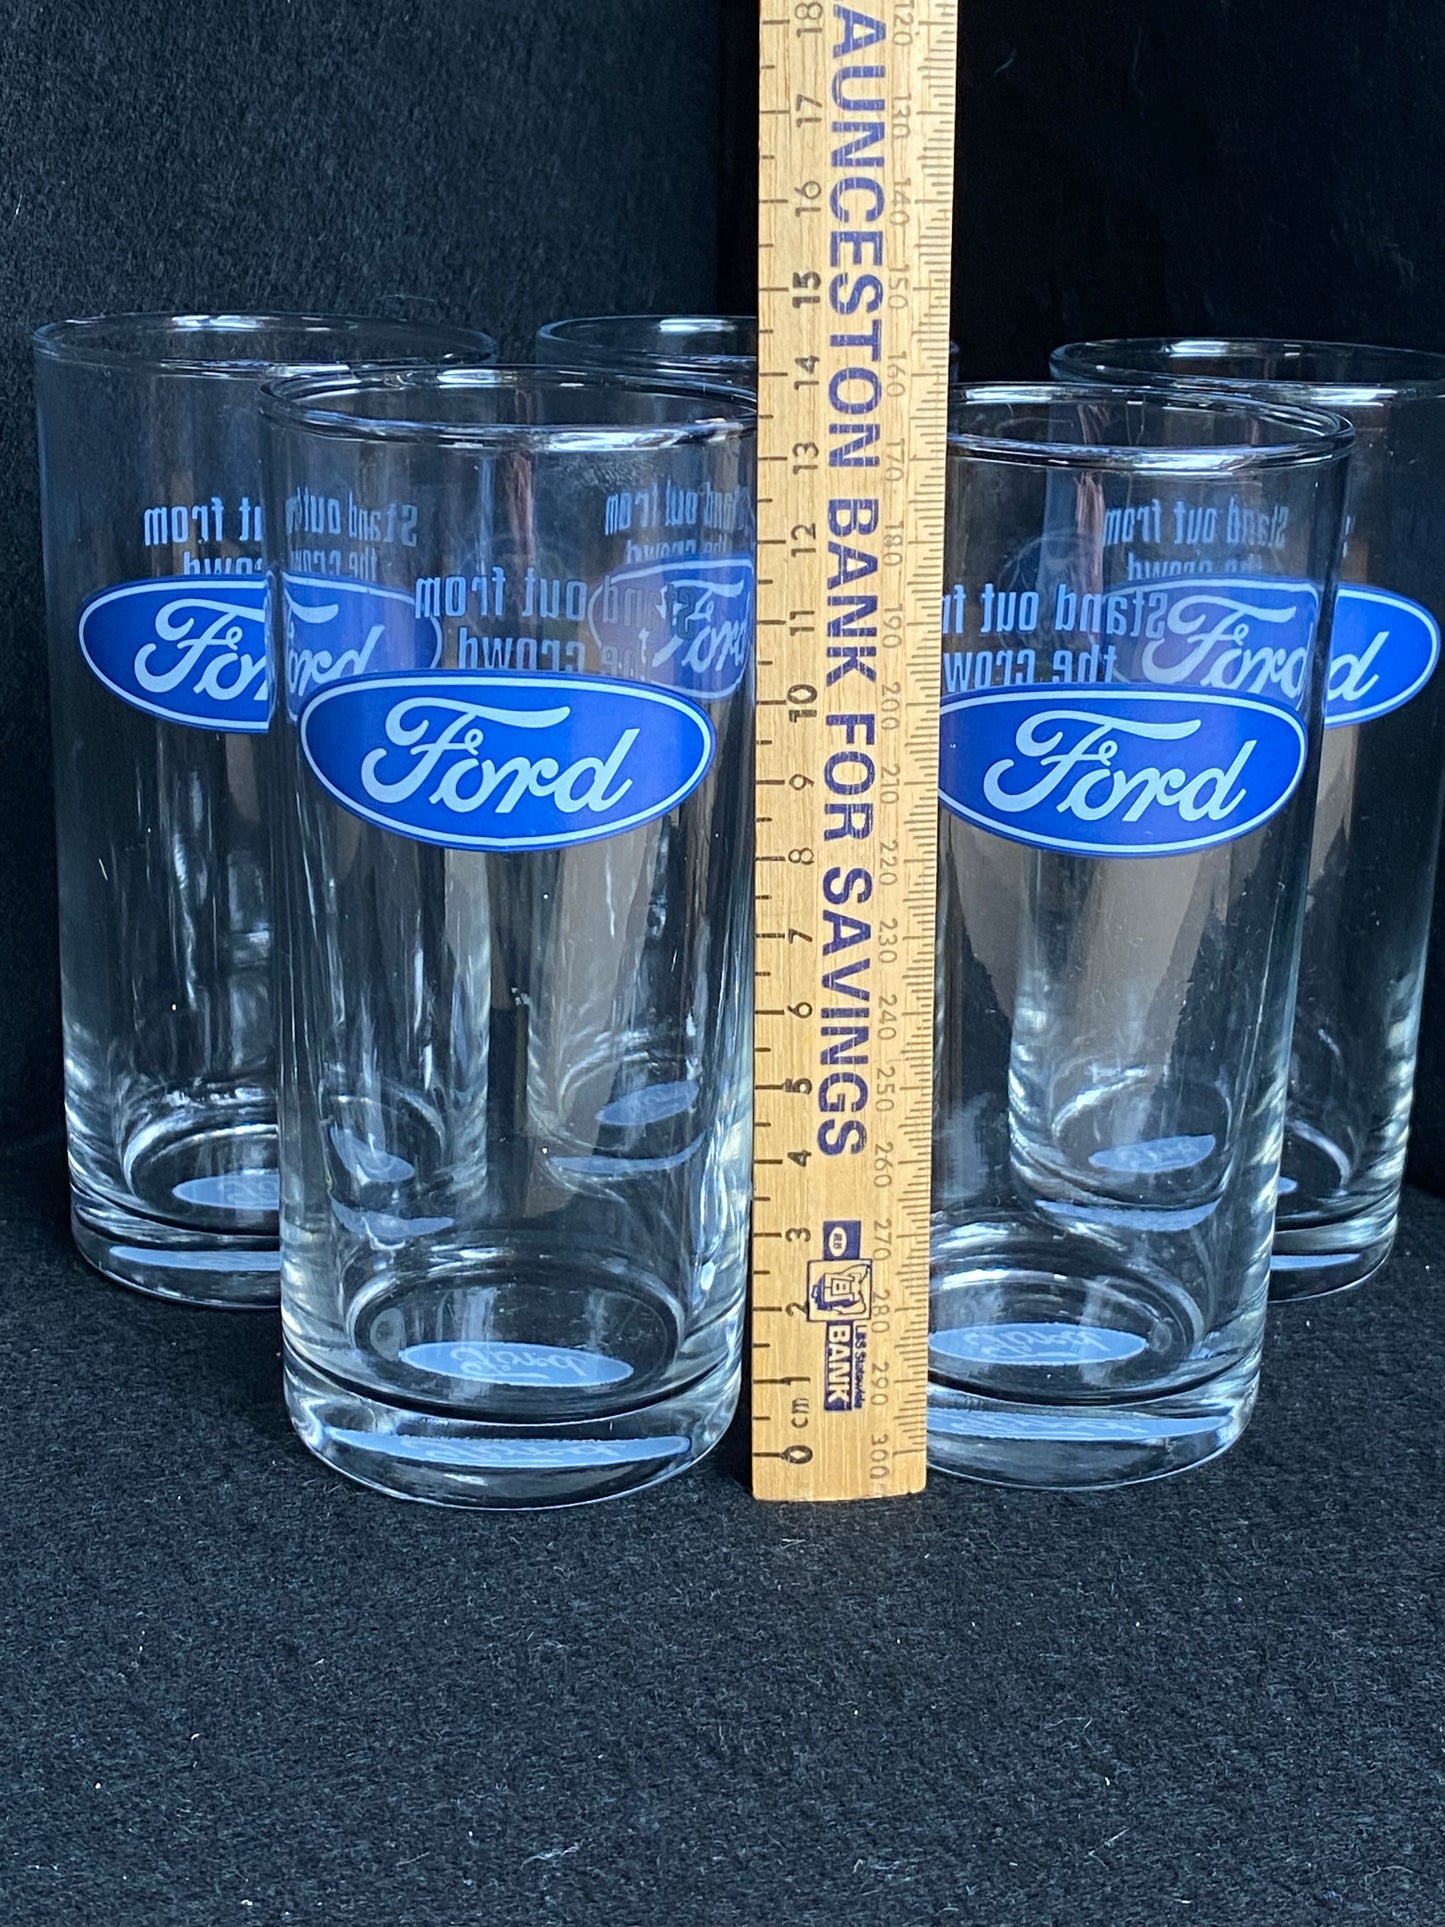 Set of 5 Retro Official Ford Motor Company Licensed 285ml glasses!